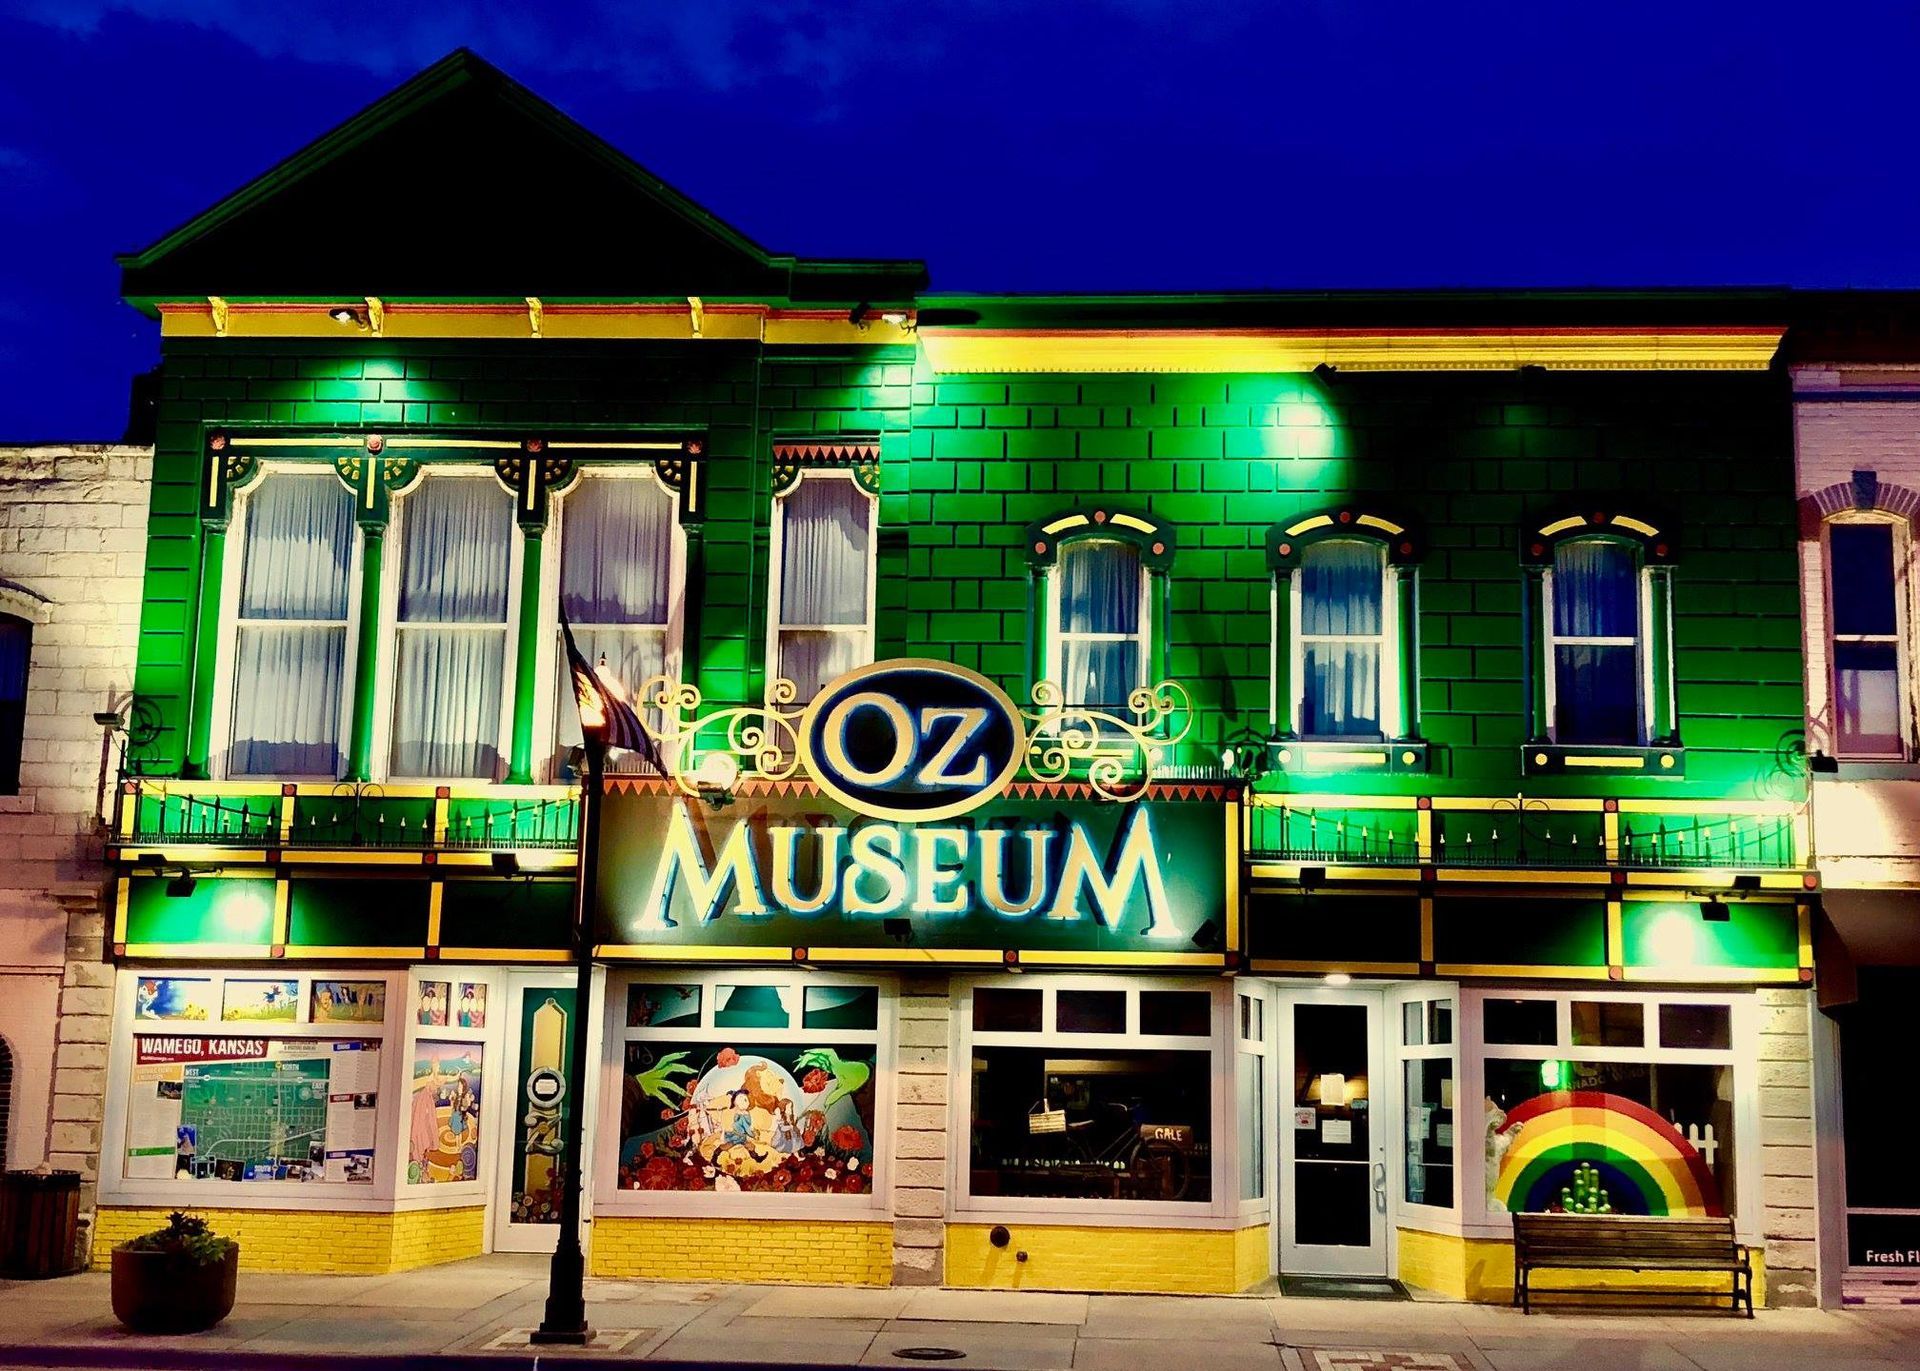 
World’s Largest Collection of Oz Memorabilia: world record in Wamego, Kansas